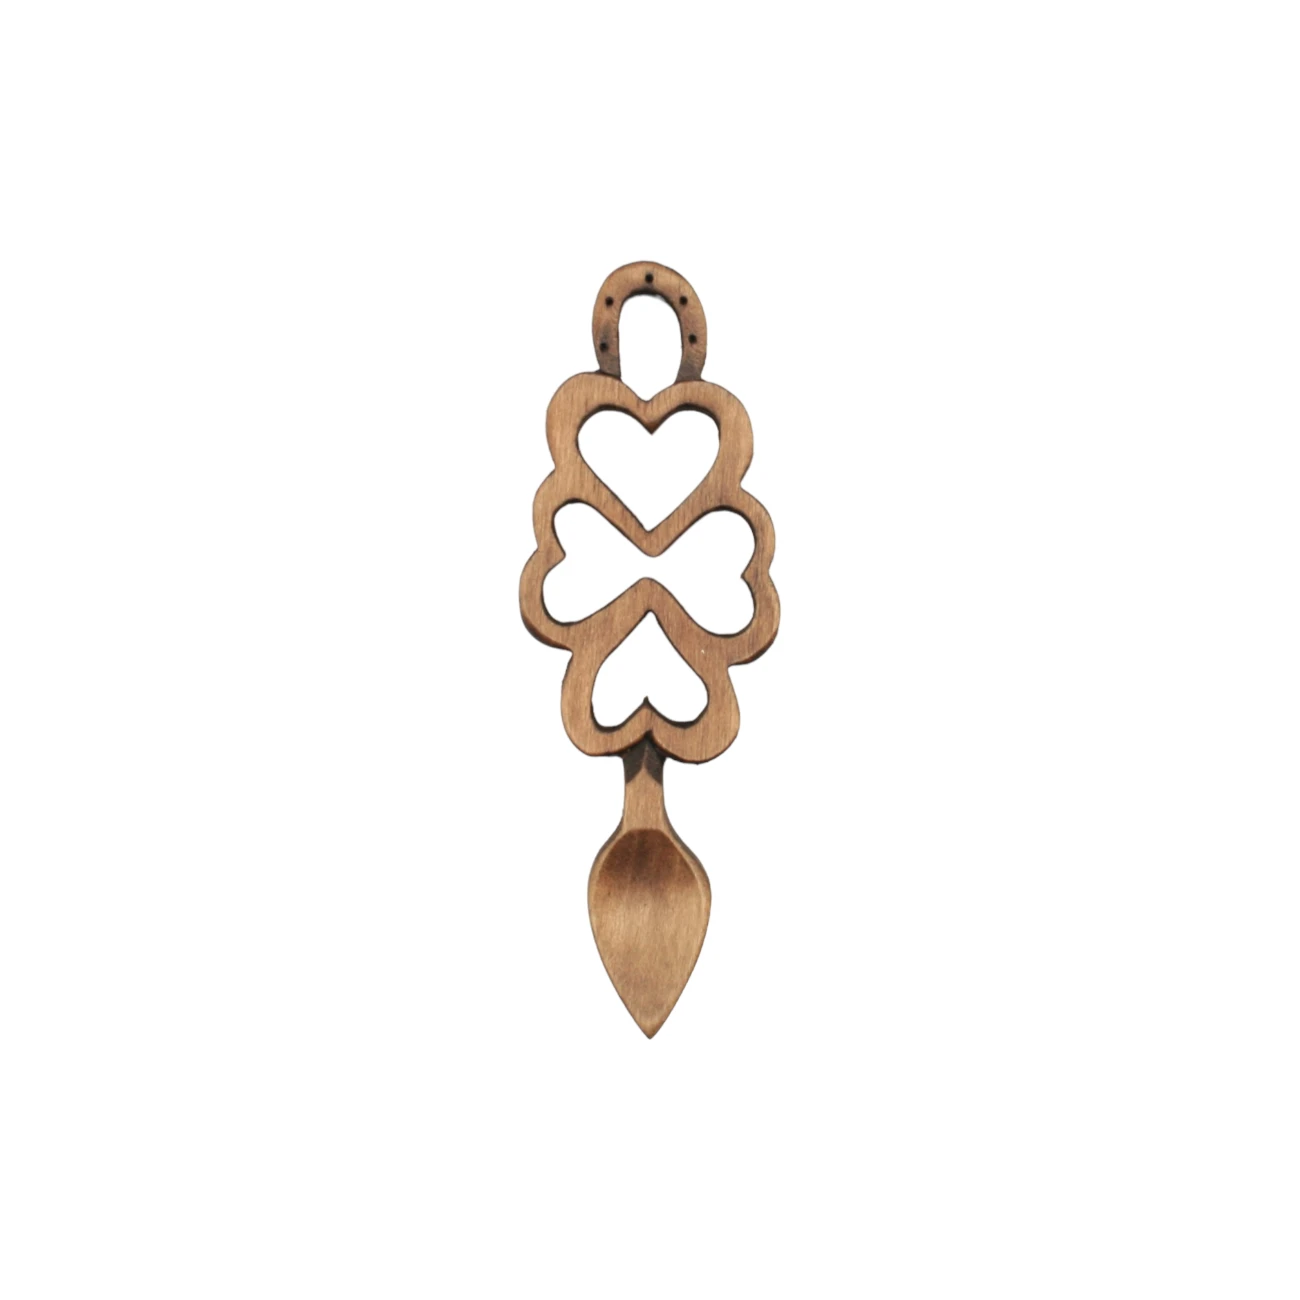 An image of a lovespoon titled Hearts & Horseshoe (3)